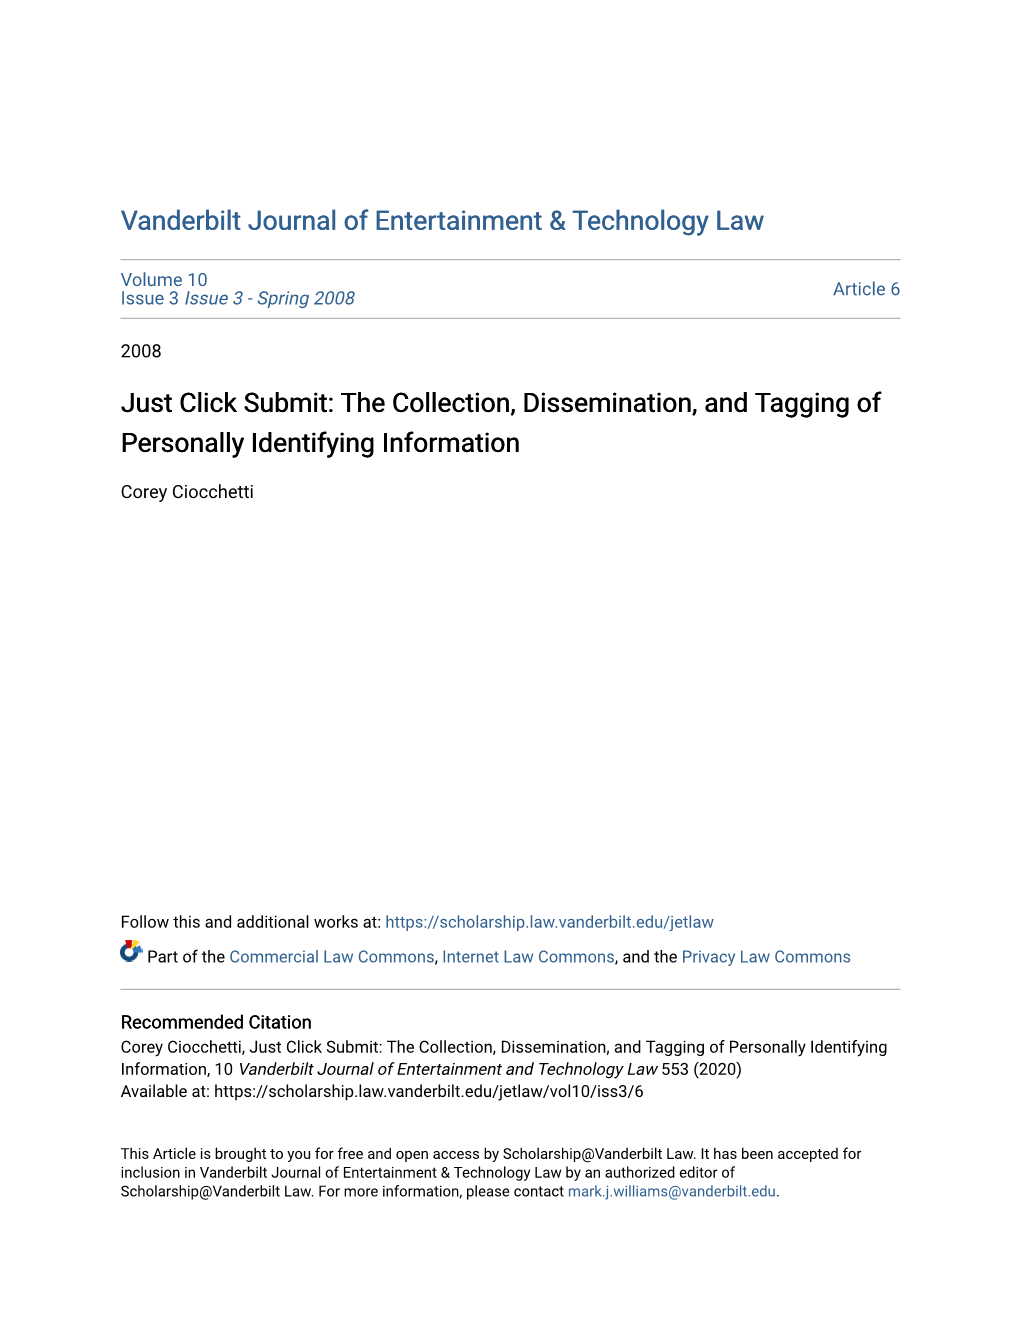 The Collection, Dissemination, and Tagging of Personally Identifying Information